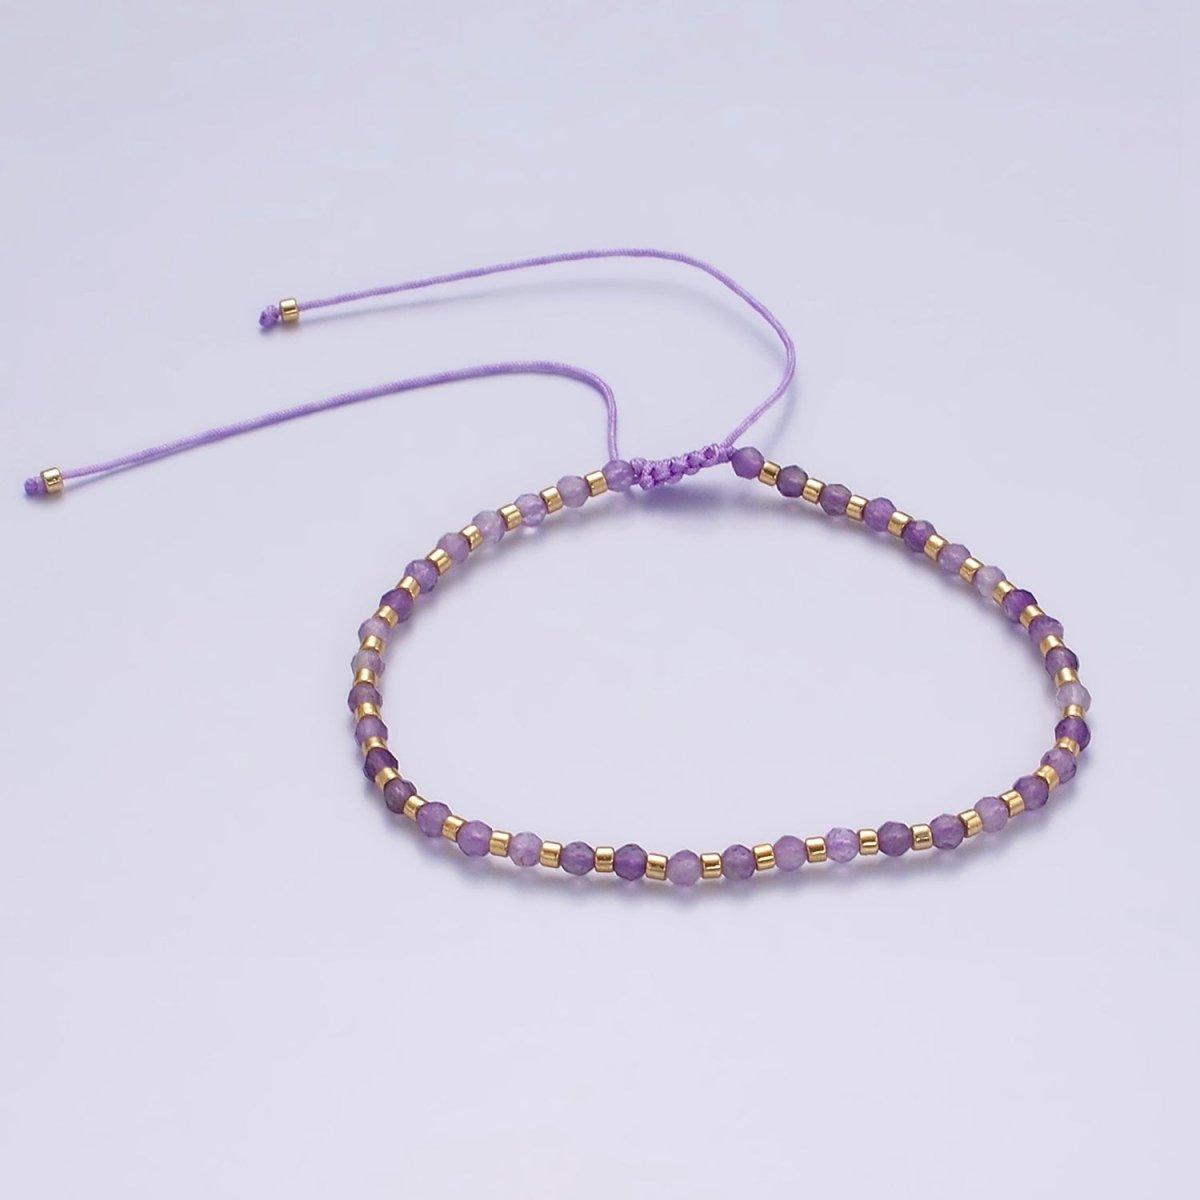 14K Gold Filled Amethyst Multifaceted Purple Rope Adjustable Friendship Bracelet | WA-2007 - WA-2009 Clearance Pricing - DLUXCA